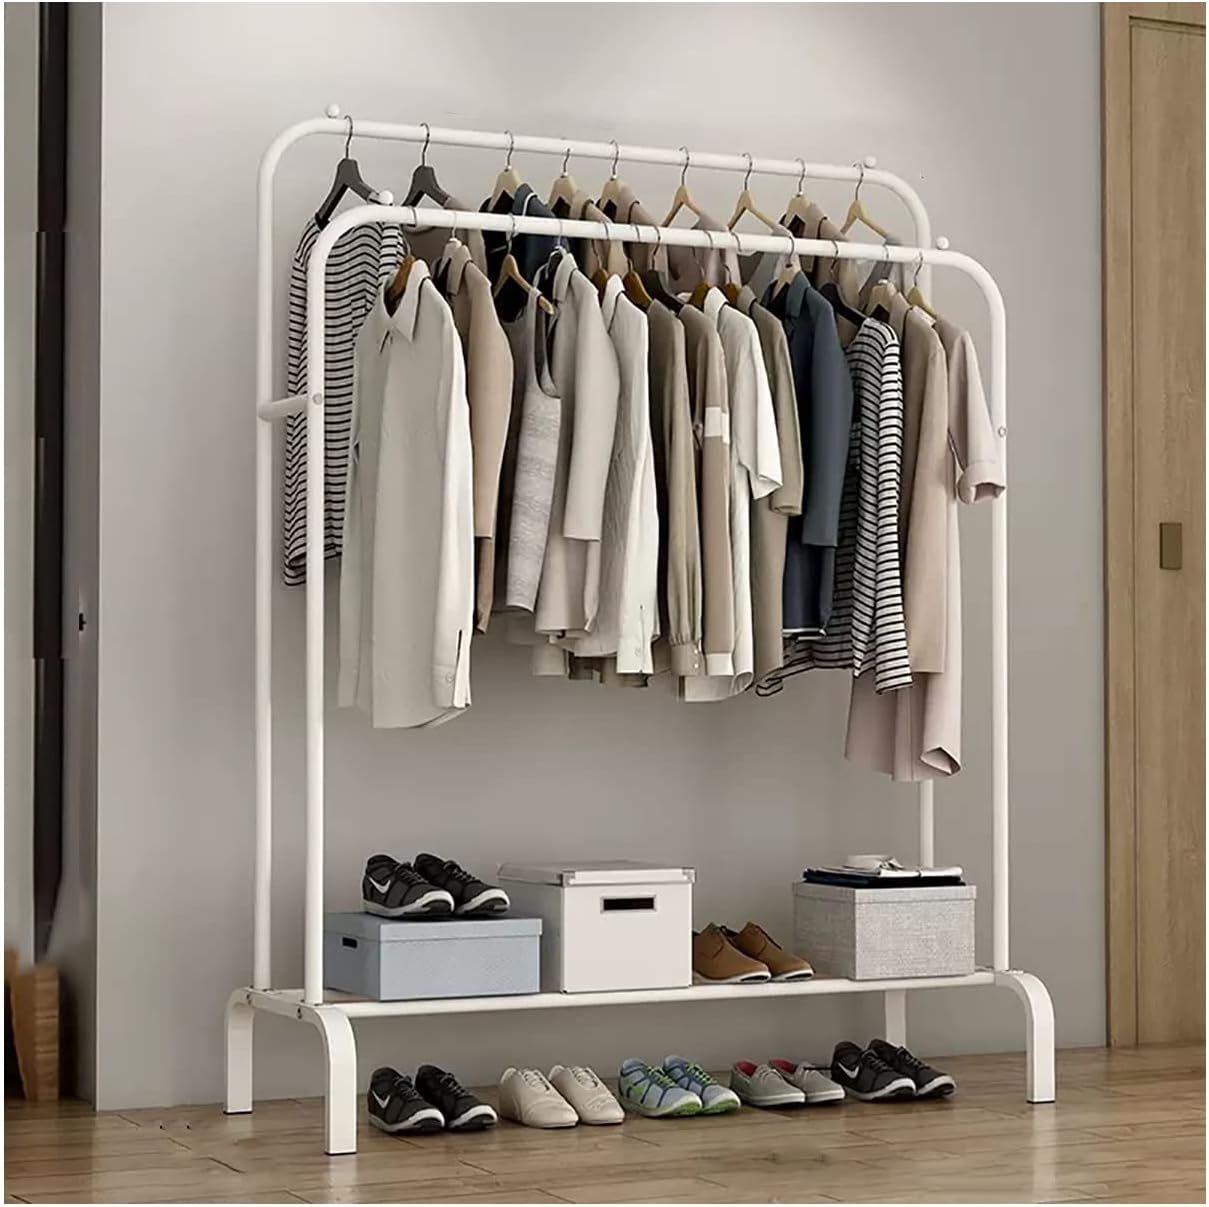 Exquisite Clothes Rail Rack Metal Coat Rack Stand with Hooks and Open Shelves Clothing Garment Rail with Wheels Double Hanging Rail for Indoor